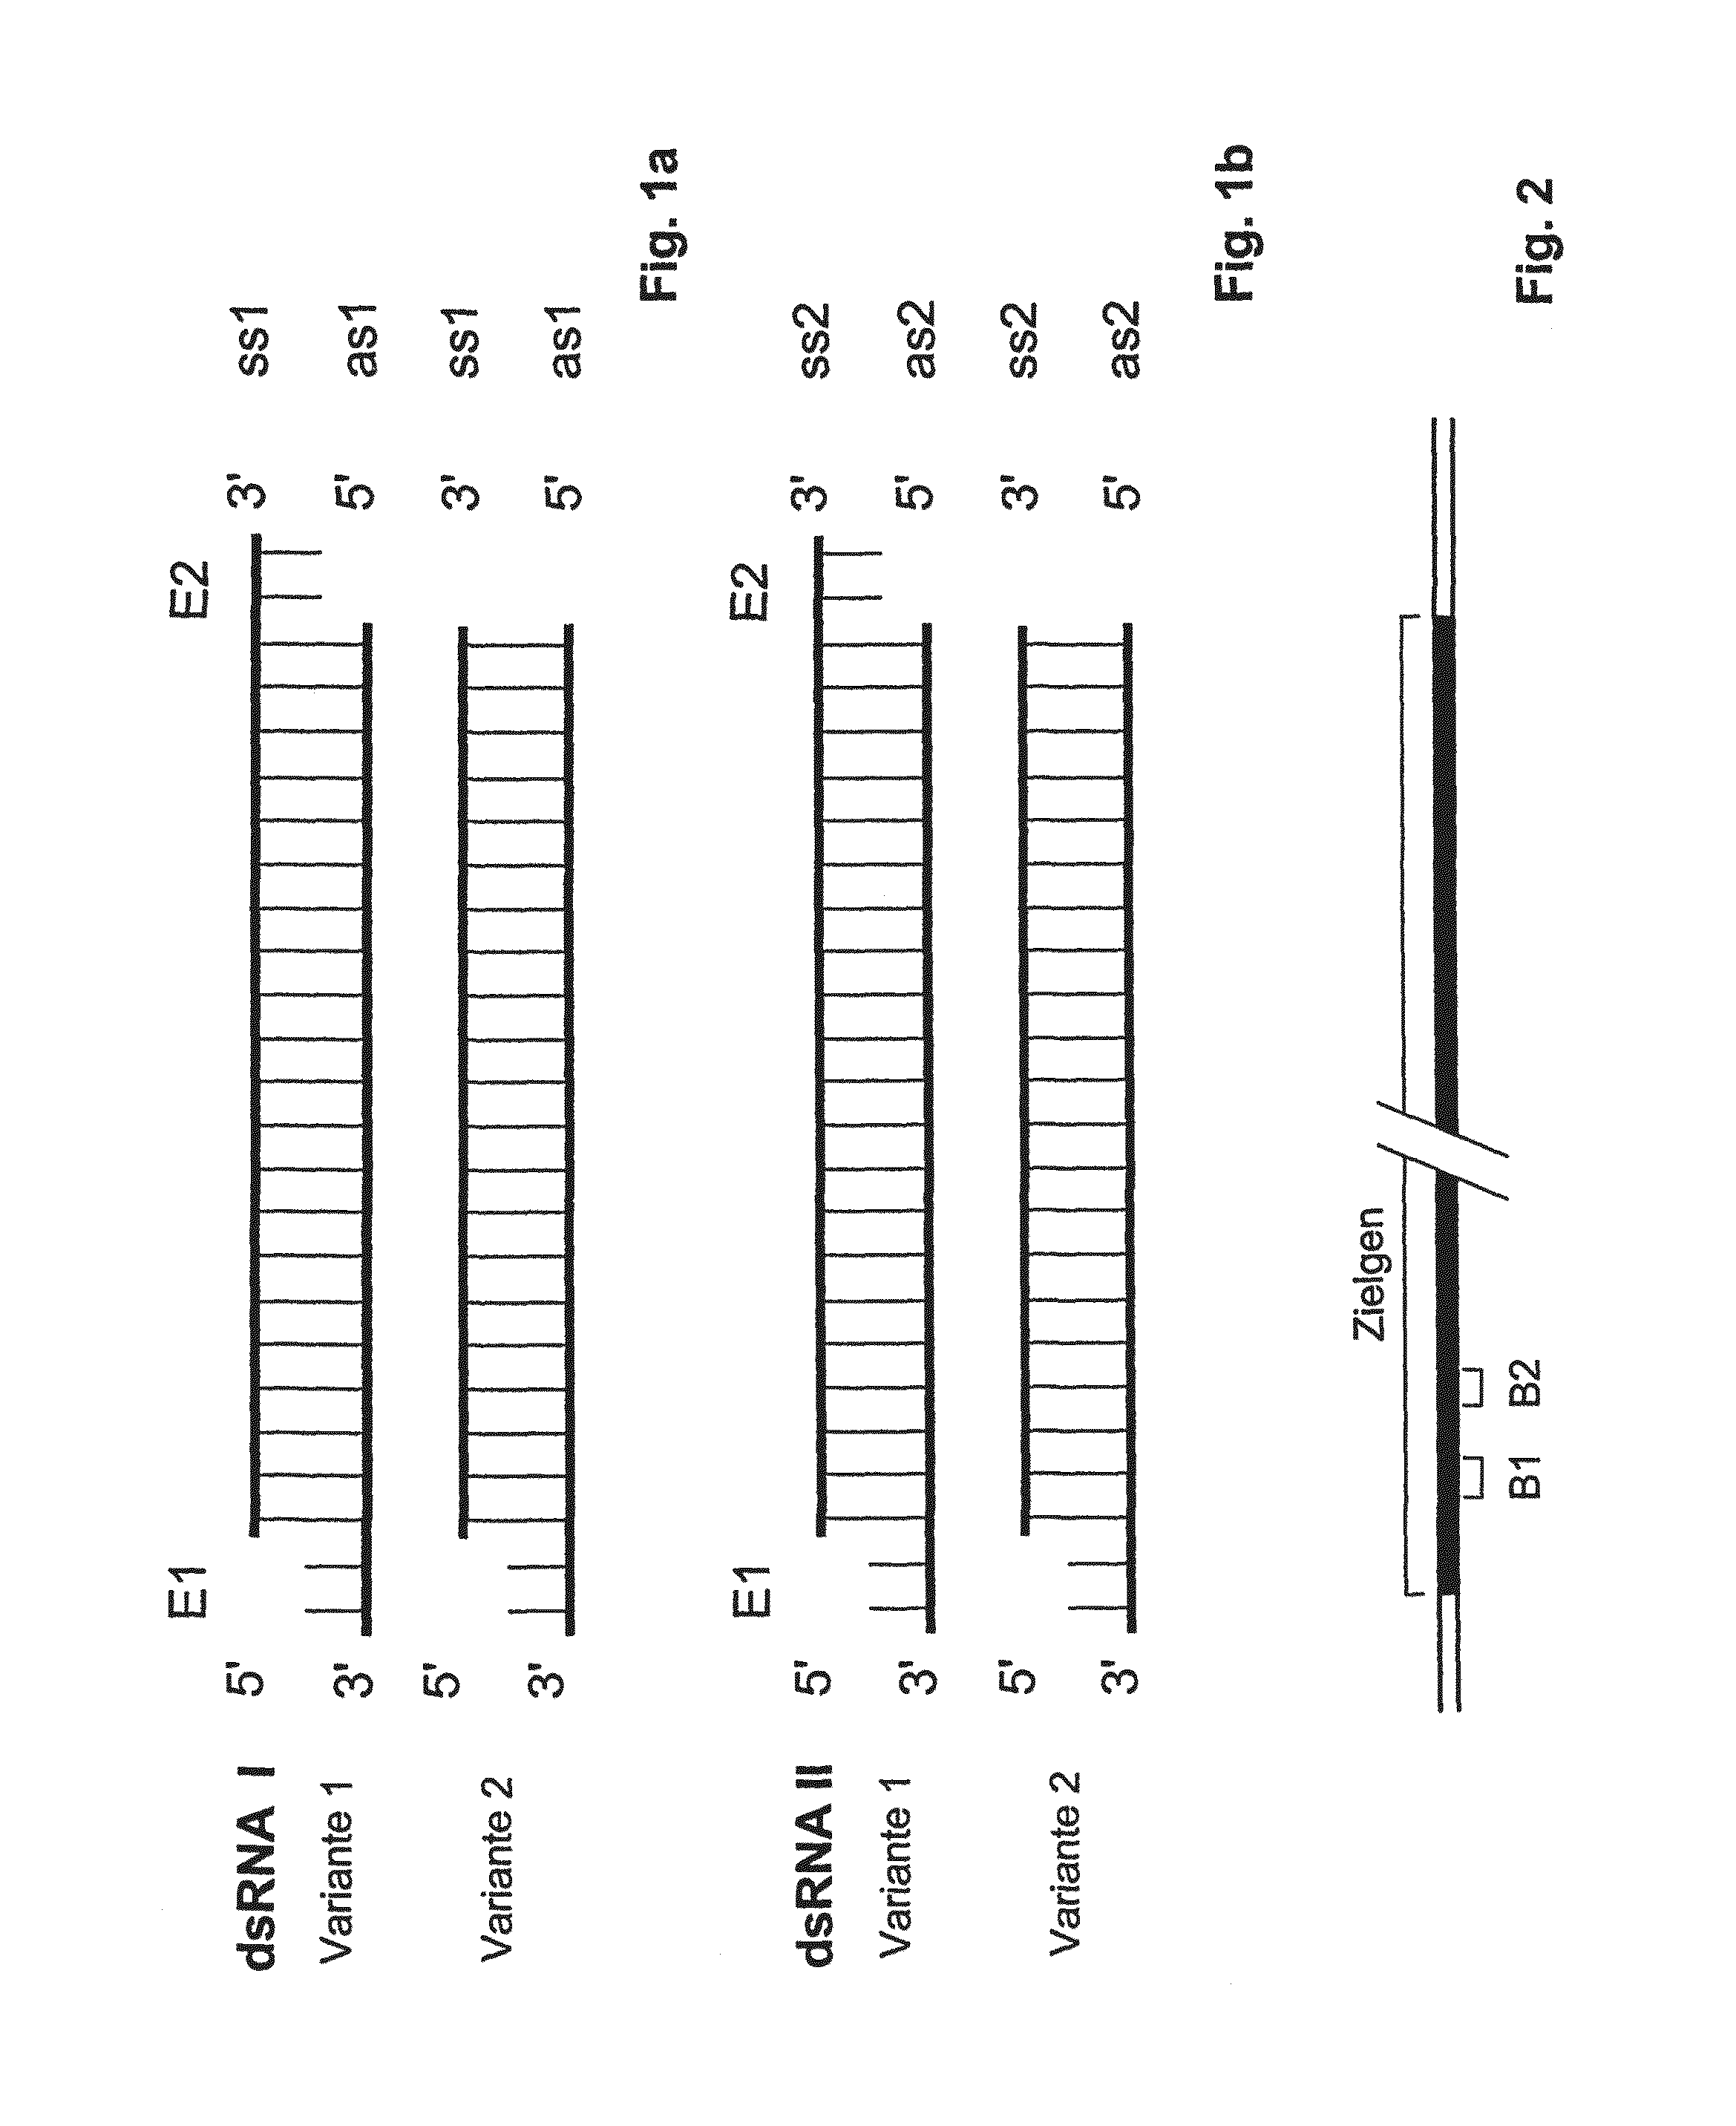 Compositions and methods for inhibiting expression of a target gene